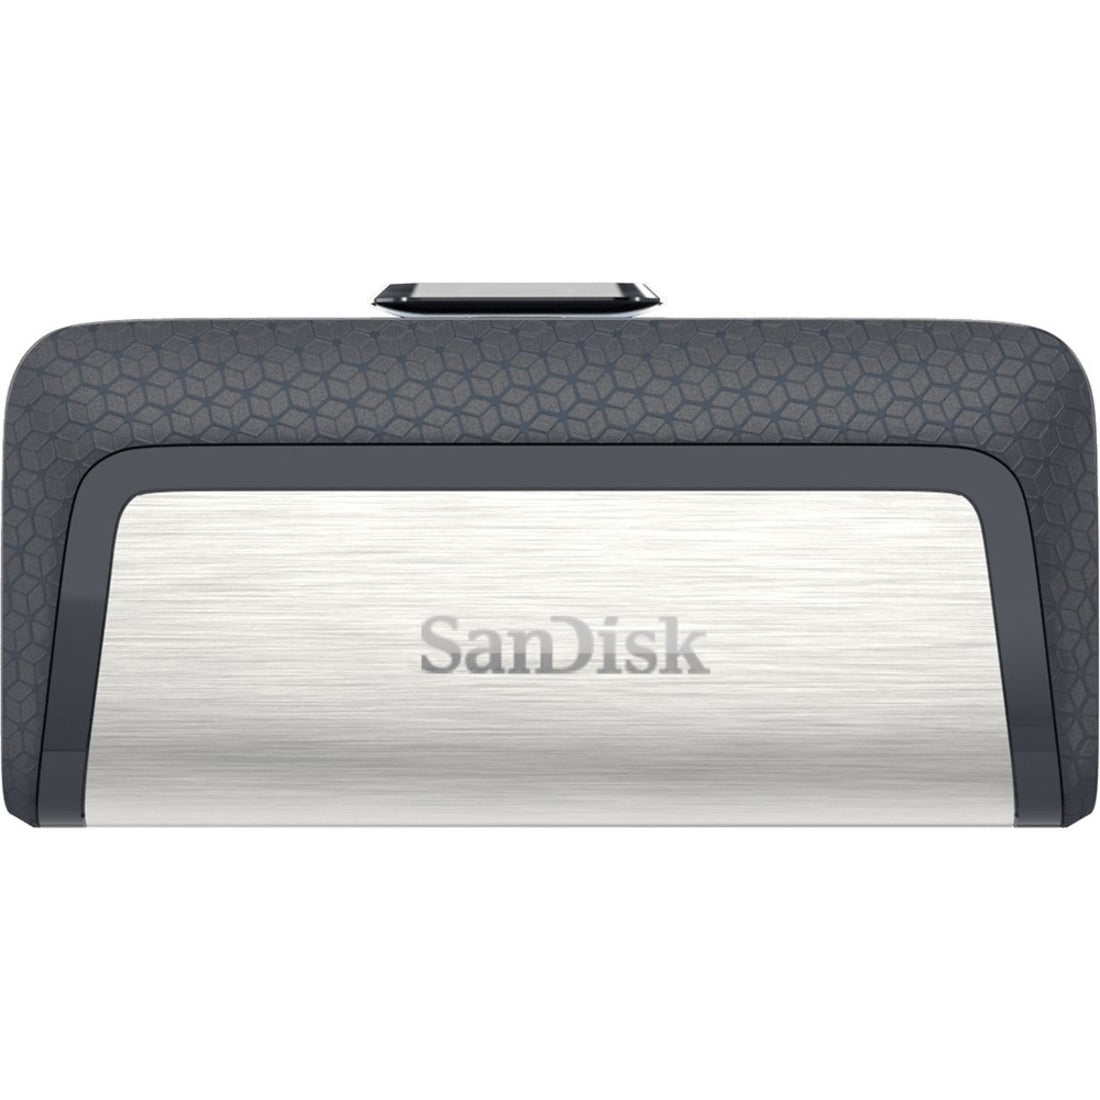 SanDisk SDDDC2-064G-A46 Ultra Dual Drive USB TYPE-C - 64GB, High-Speed Data Transfer and Easy File Management